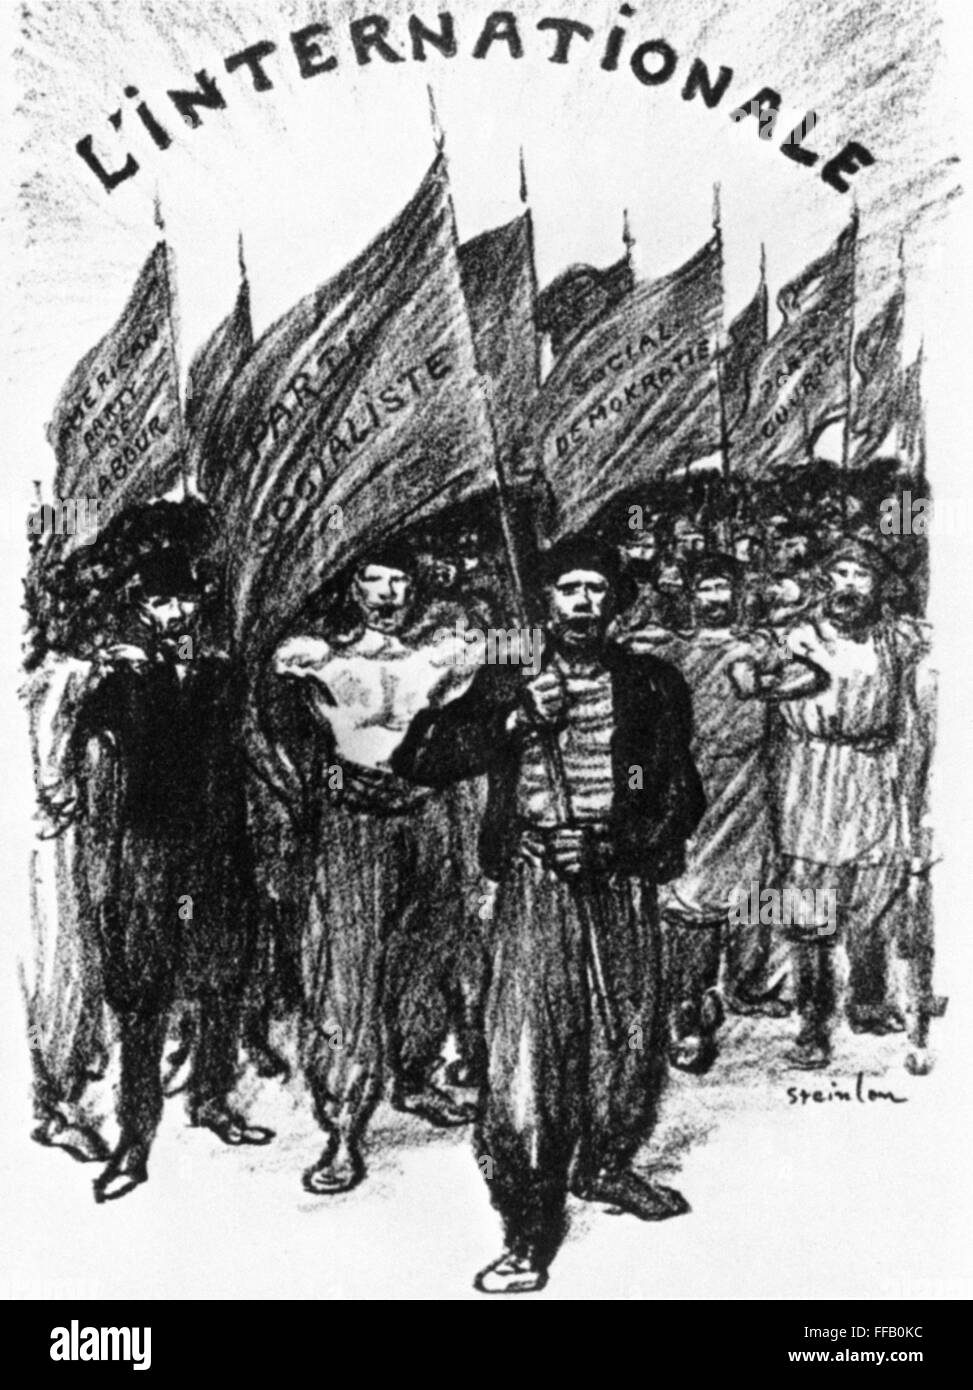 SOCIALISM, 1895. /nAn advancing army of workers carries the banners with the names of workers' parties from around the world. Lithograph, 1895, by ThΘophile Alexandre Steinlen, for an edition of the socialist hymn 'L'Internationale.' Stock Photo